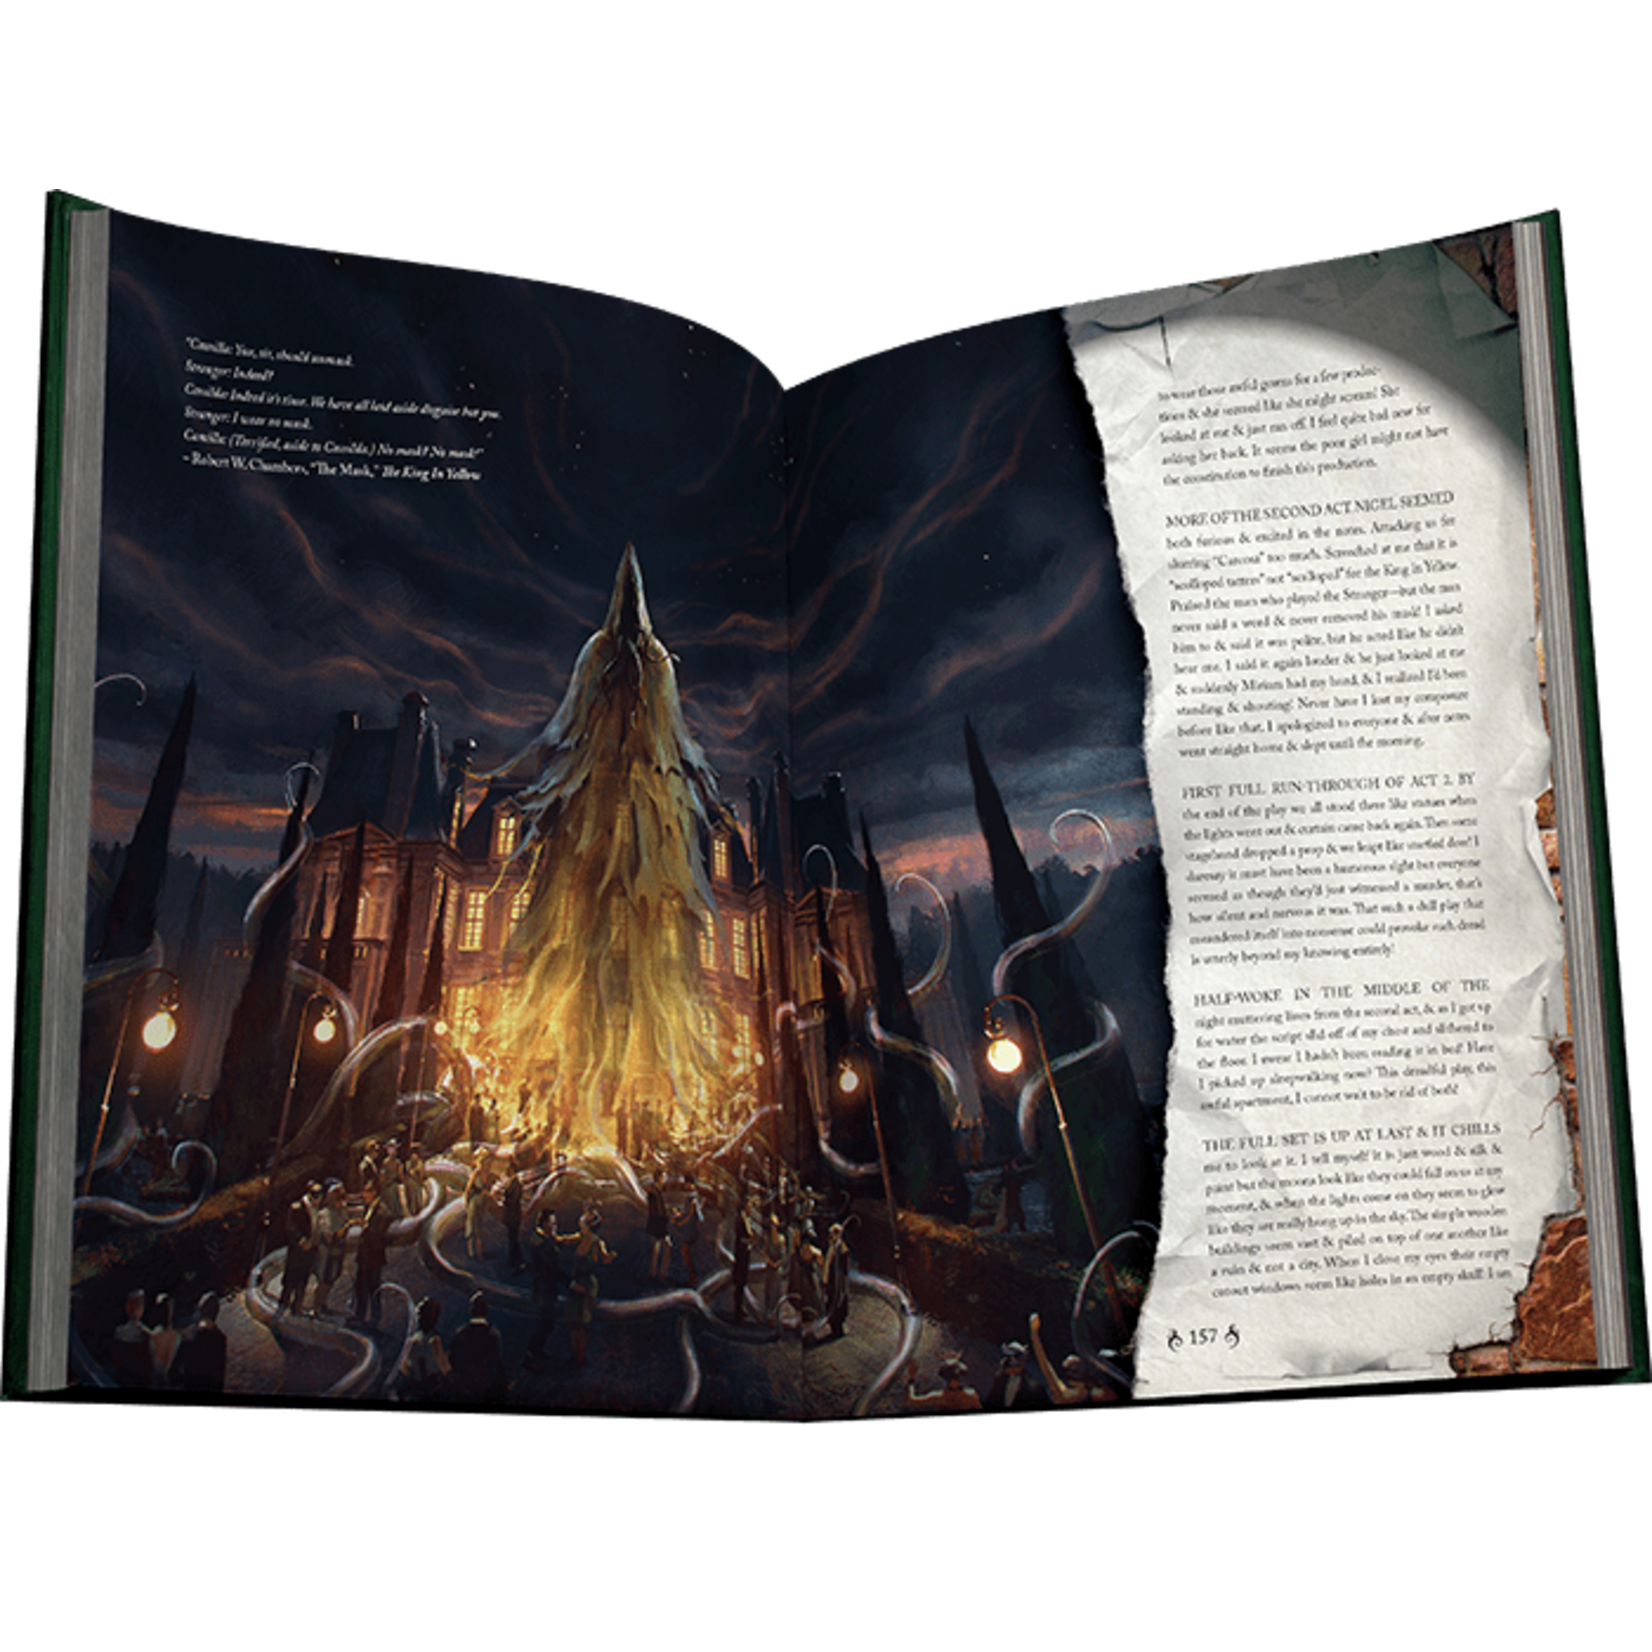 The Investigators of Arkham Horror Tales of Adventures and Madness (HC)